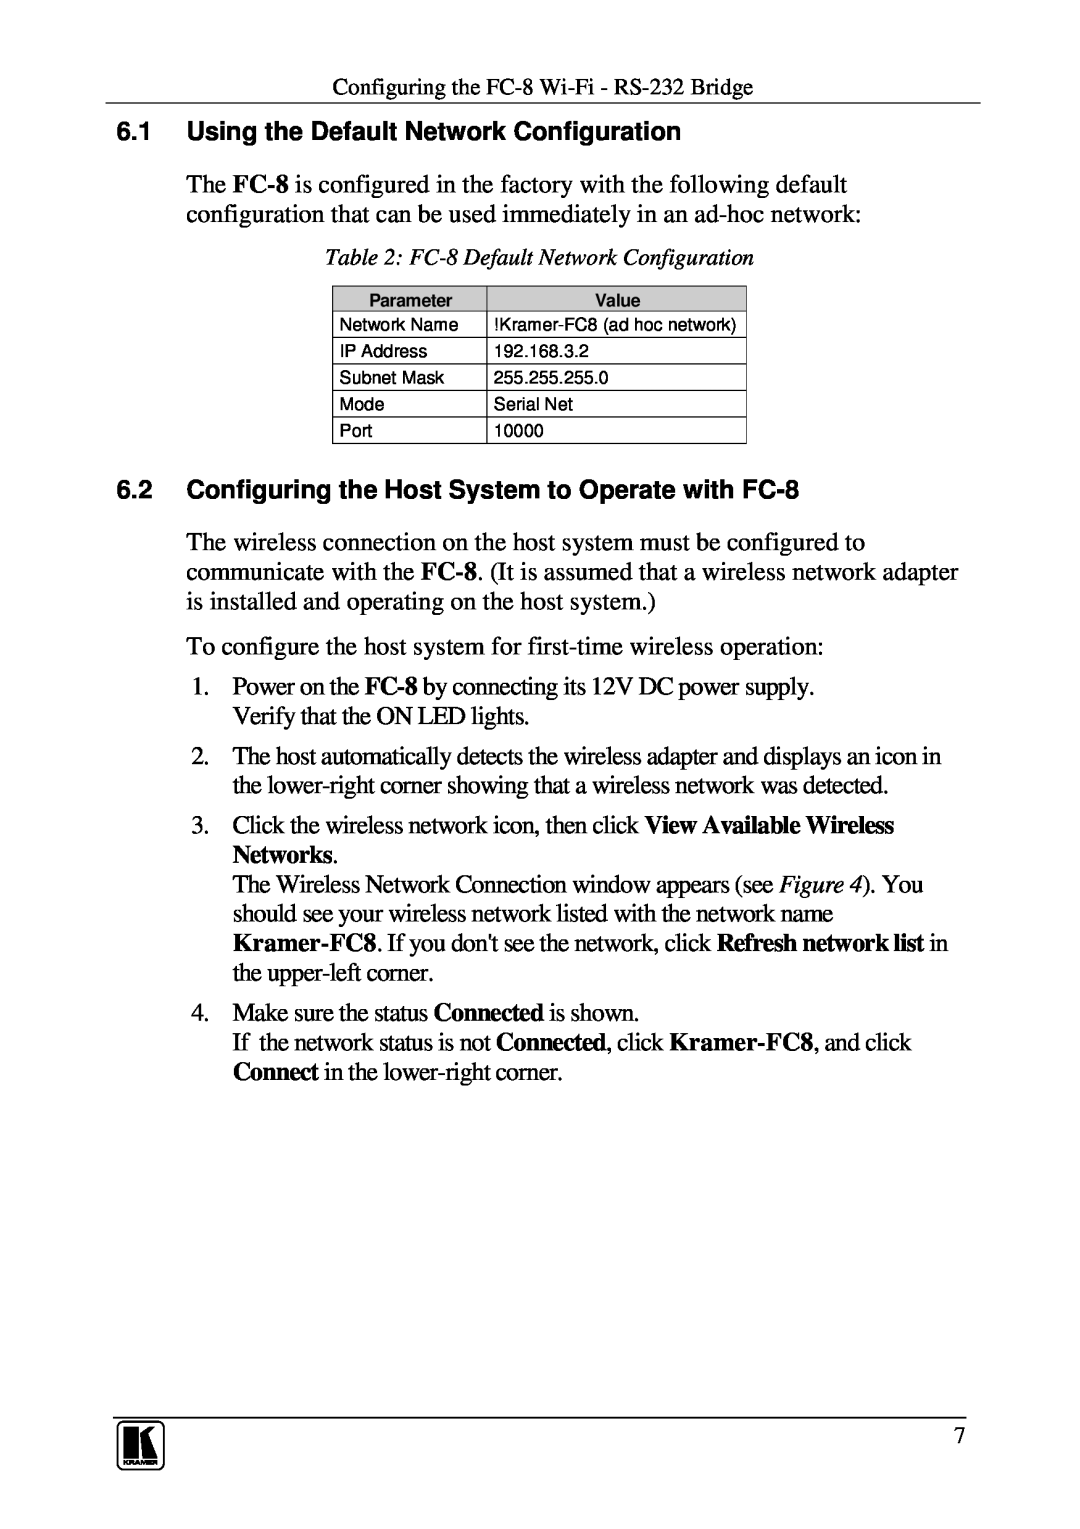 Kramer Electronics user manual Using the Default Network Configuration, Configuring the Host System to Operate with FC-8 